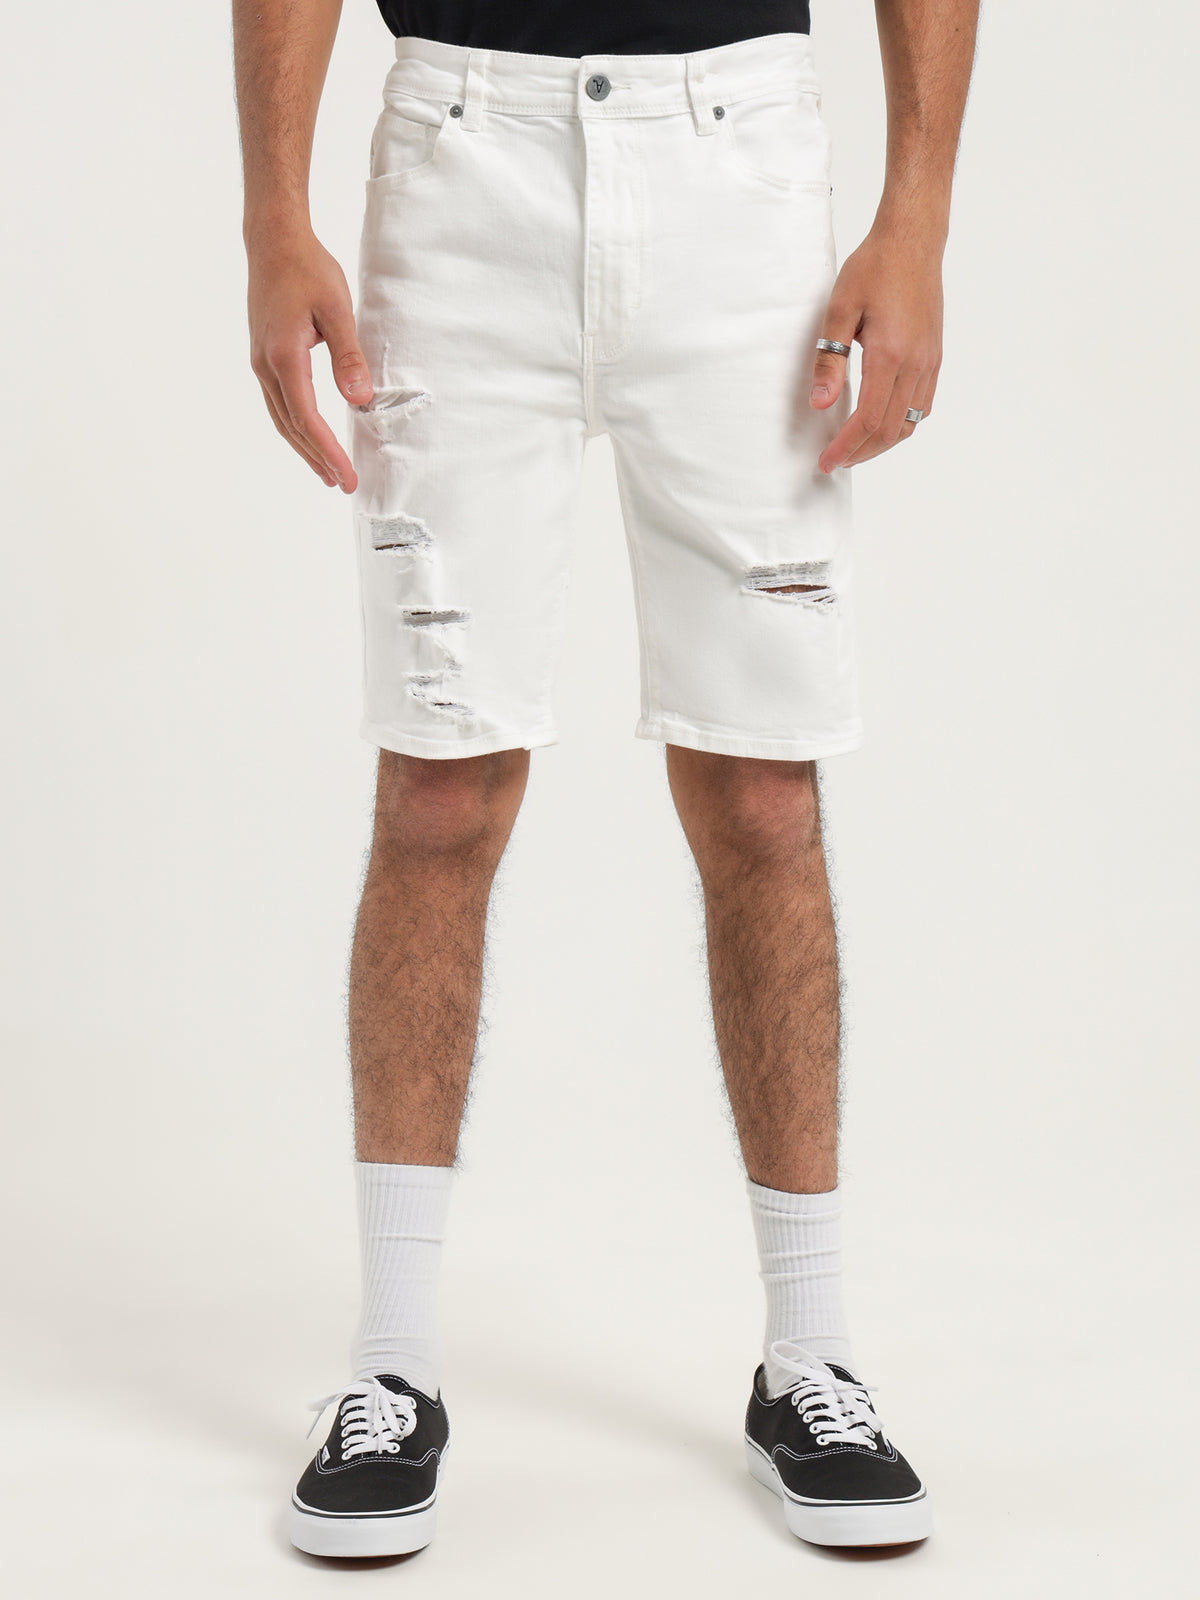 A Dropped Skinny Shorts in White